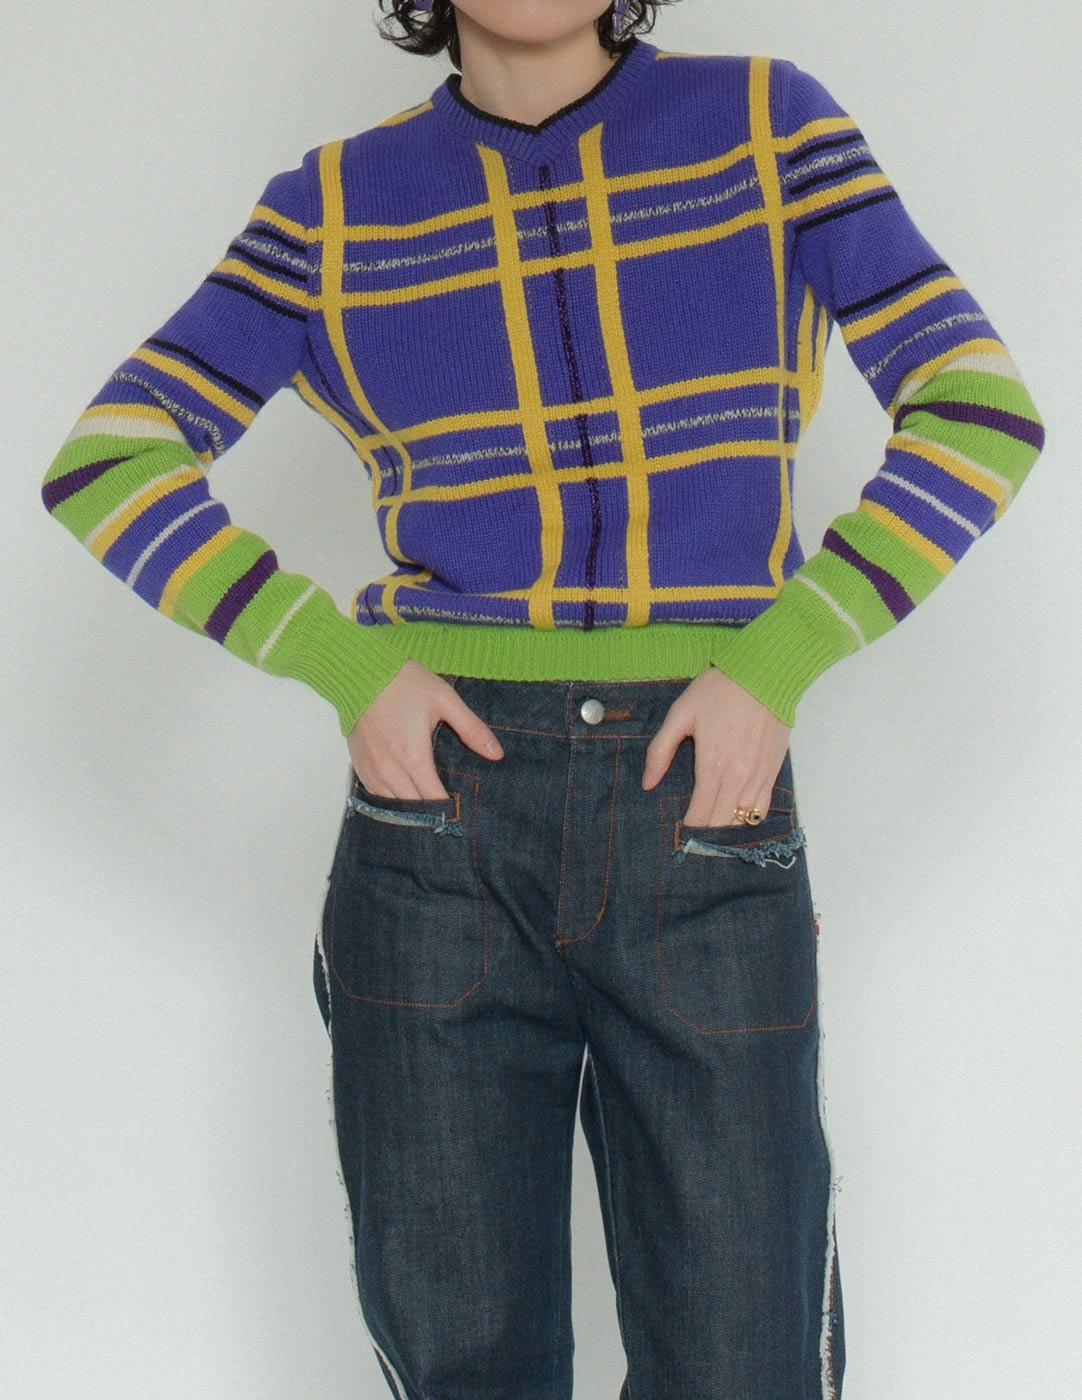 Gianni Versace vintage multi-colored plaid sweater front detail